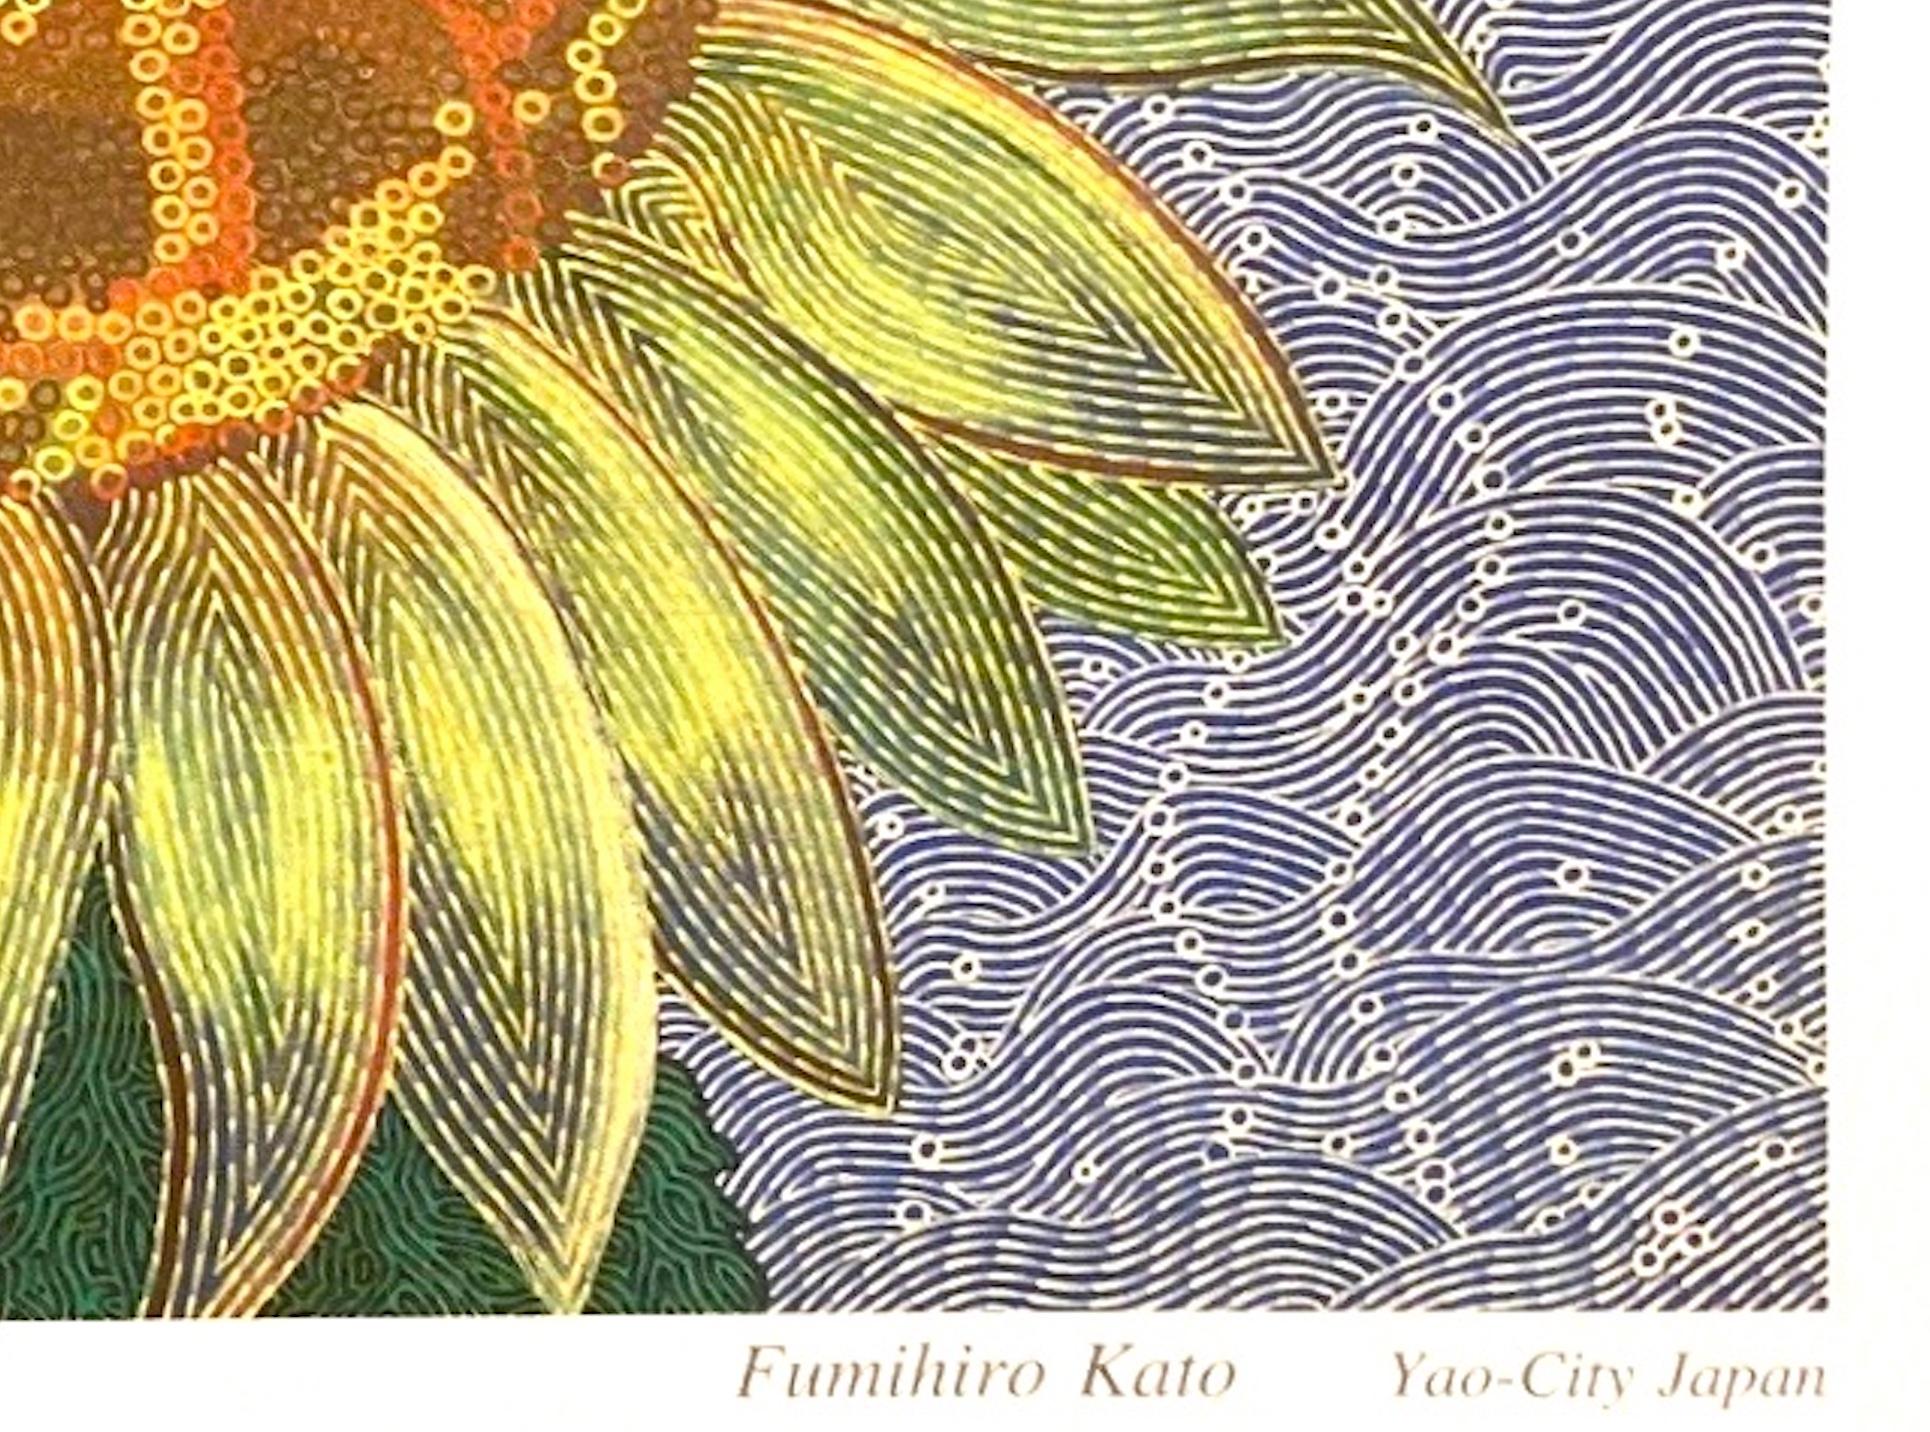 A contemporary print by a Japanese artist Fumihiro Kato. 

The focal point of the composition is a stunning sunflower, rendered in various shades of yellow. The flower dominates the piece, taking up most of the space and commanding attention with